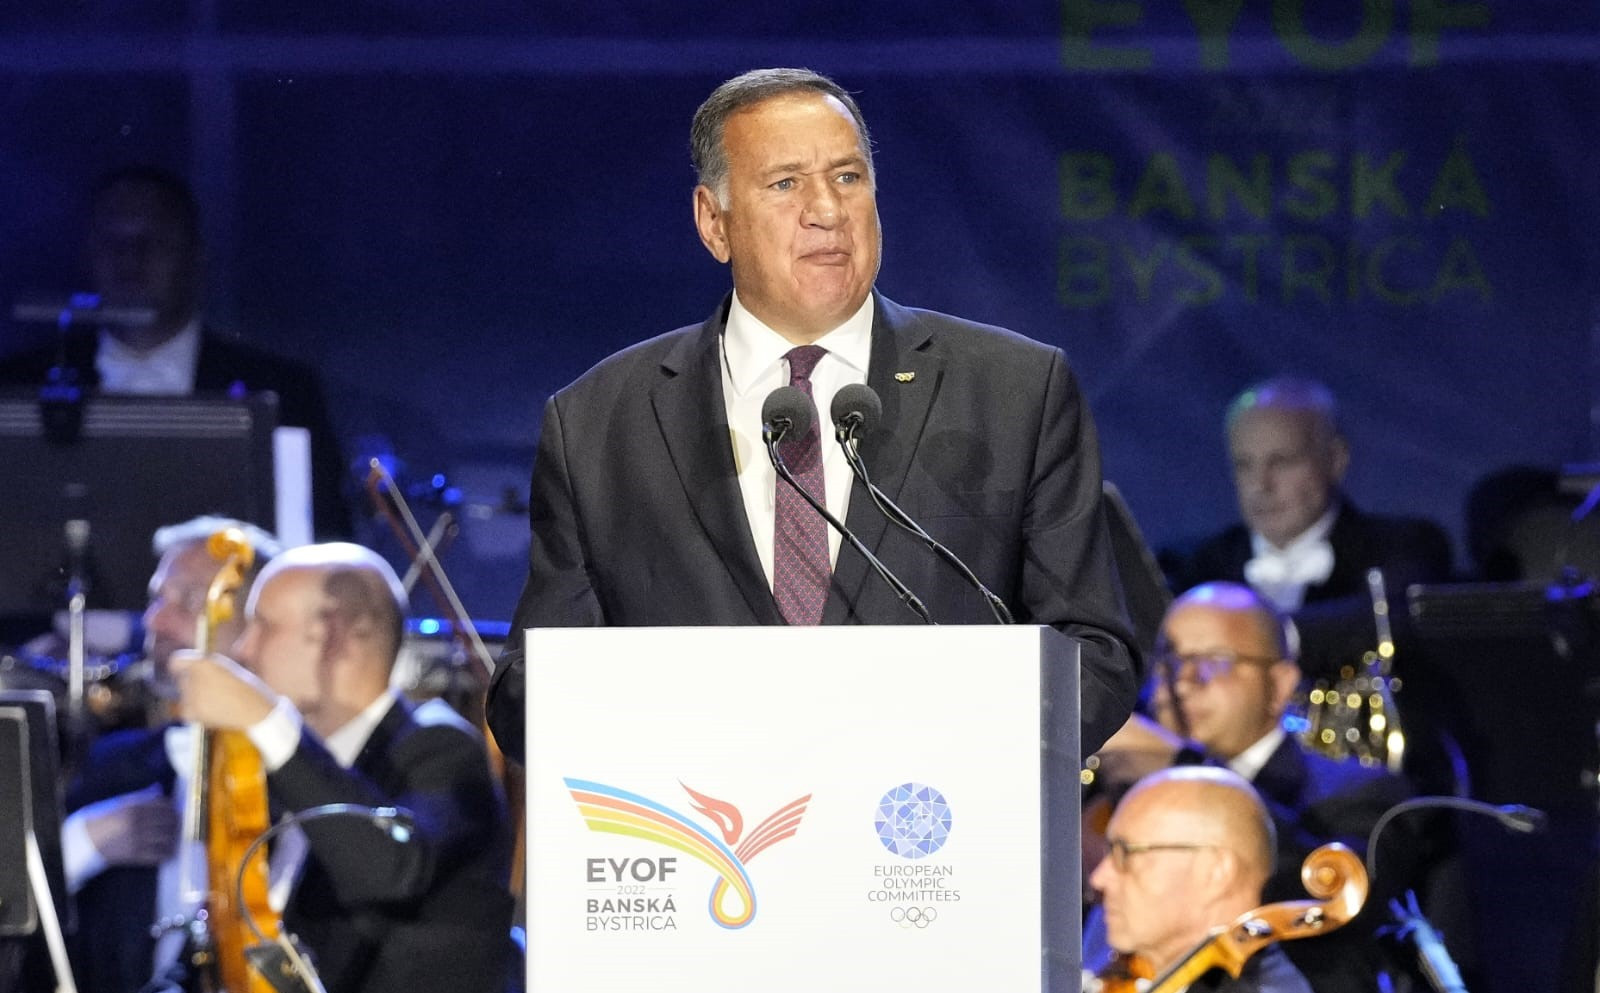 European Olympic Committees President Spyros Capralos addressed the crowd at the Opening Ceremony ©Nacho Casares/EOC